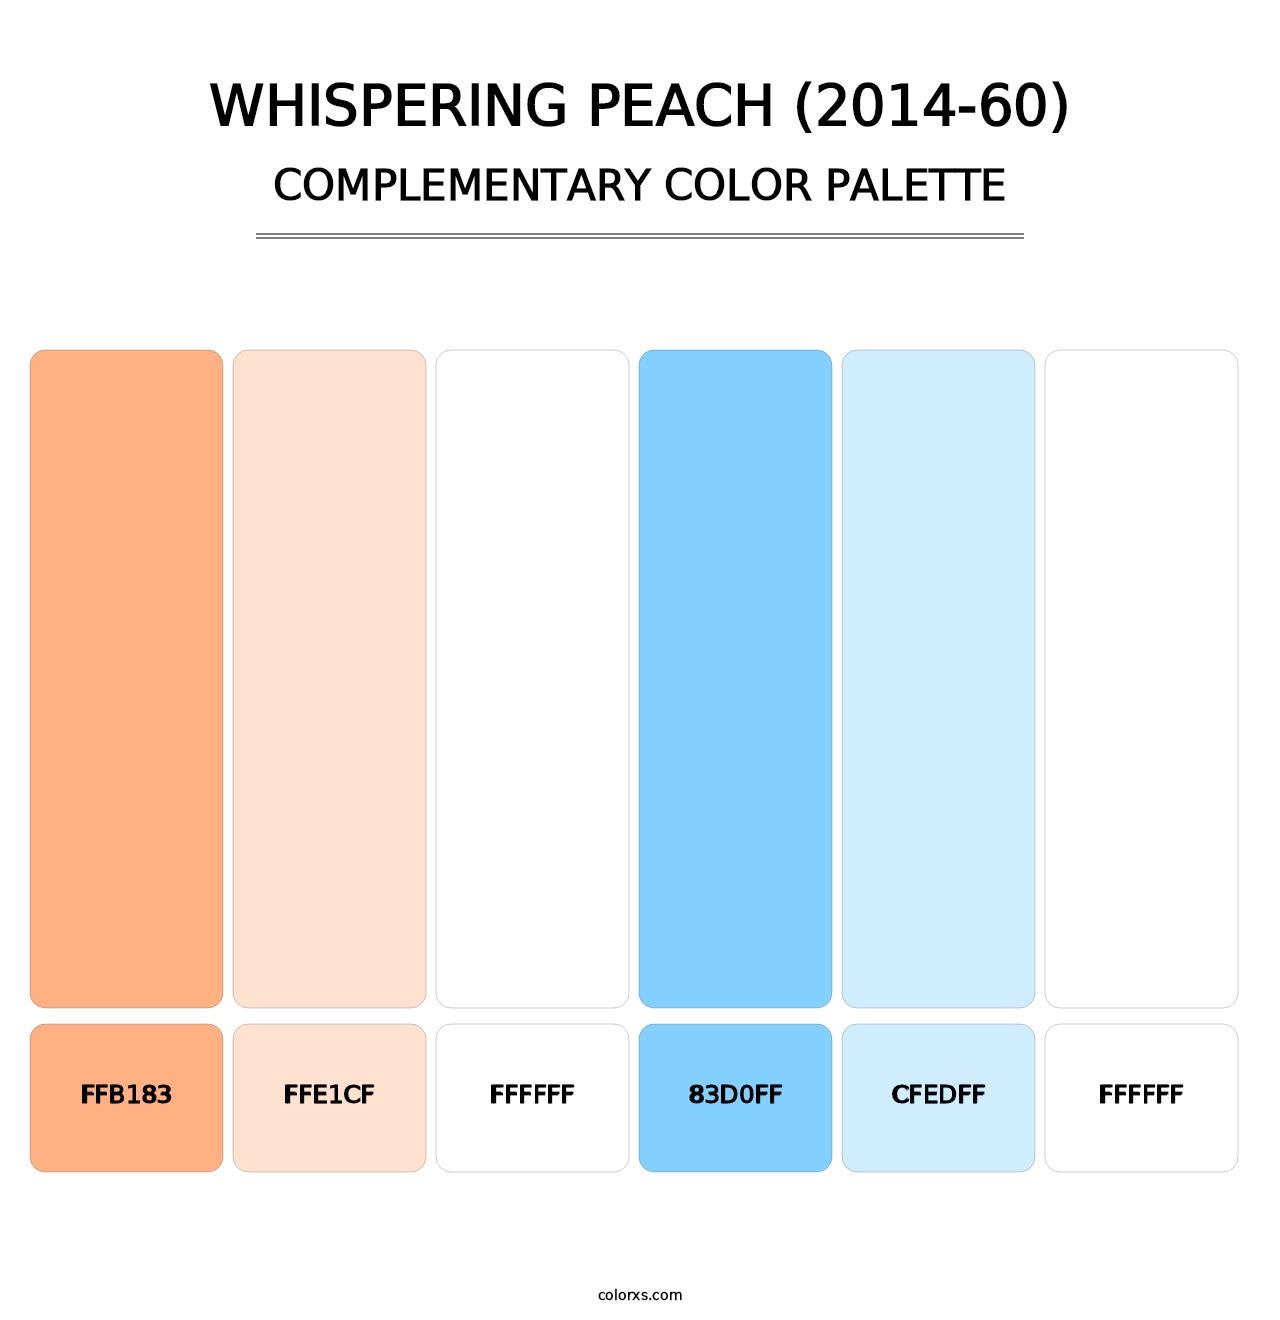 Whispering Peach (2014-60) - Complementary Color Palette